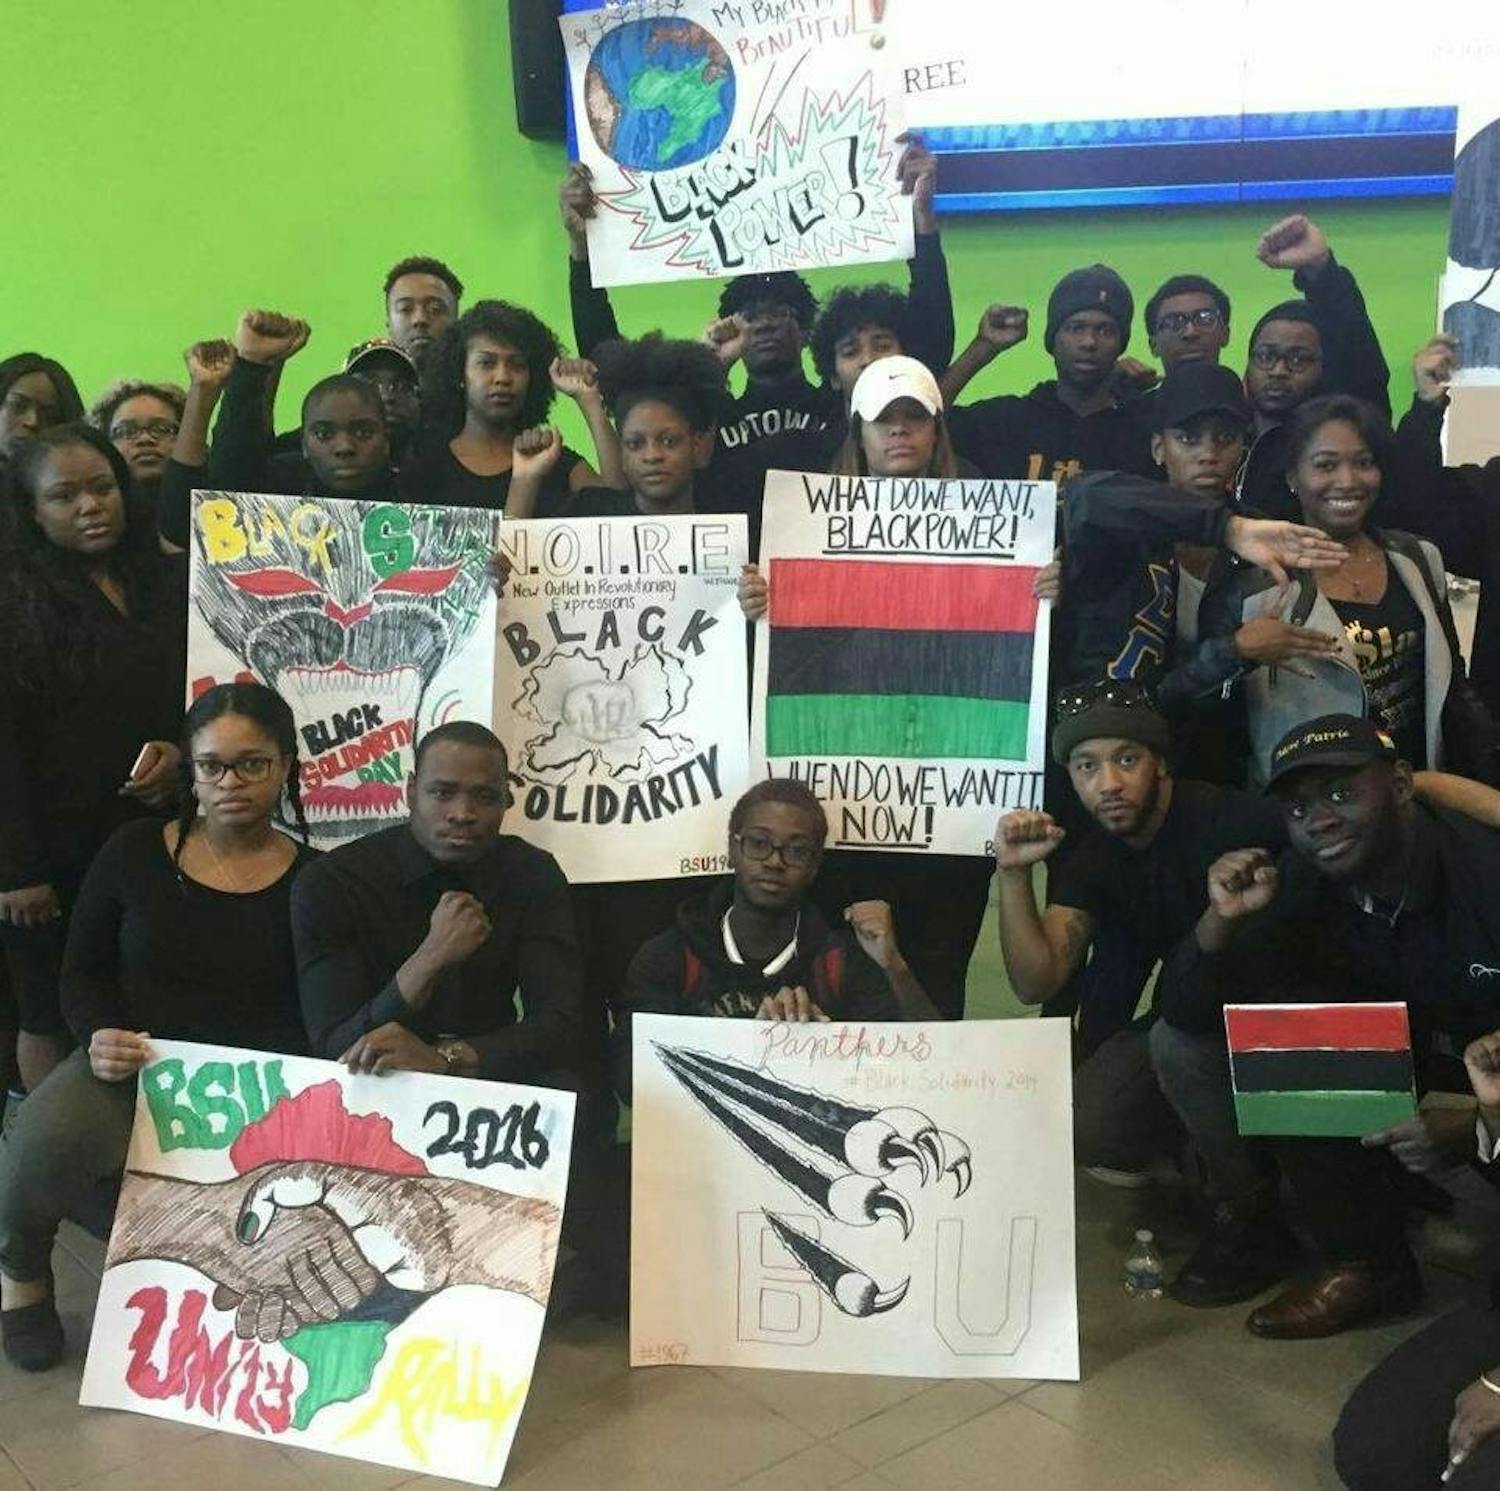 On Monday, UB's Black Student Union held their 49th annual Solidarity Day, an event meant to support local black-owned businesses and galvanize black voters beyond the general election&nbsp;into local and state elections.